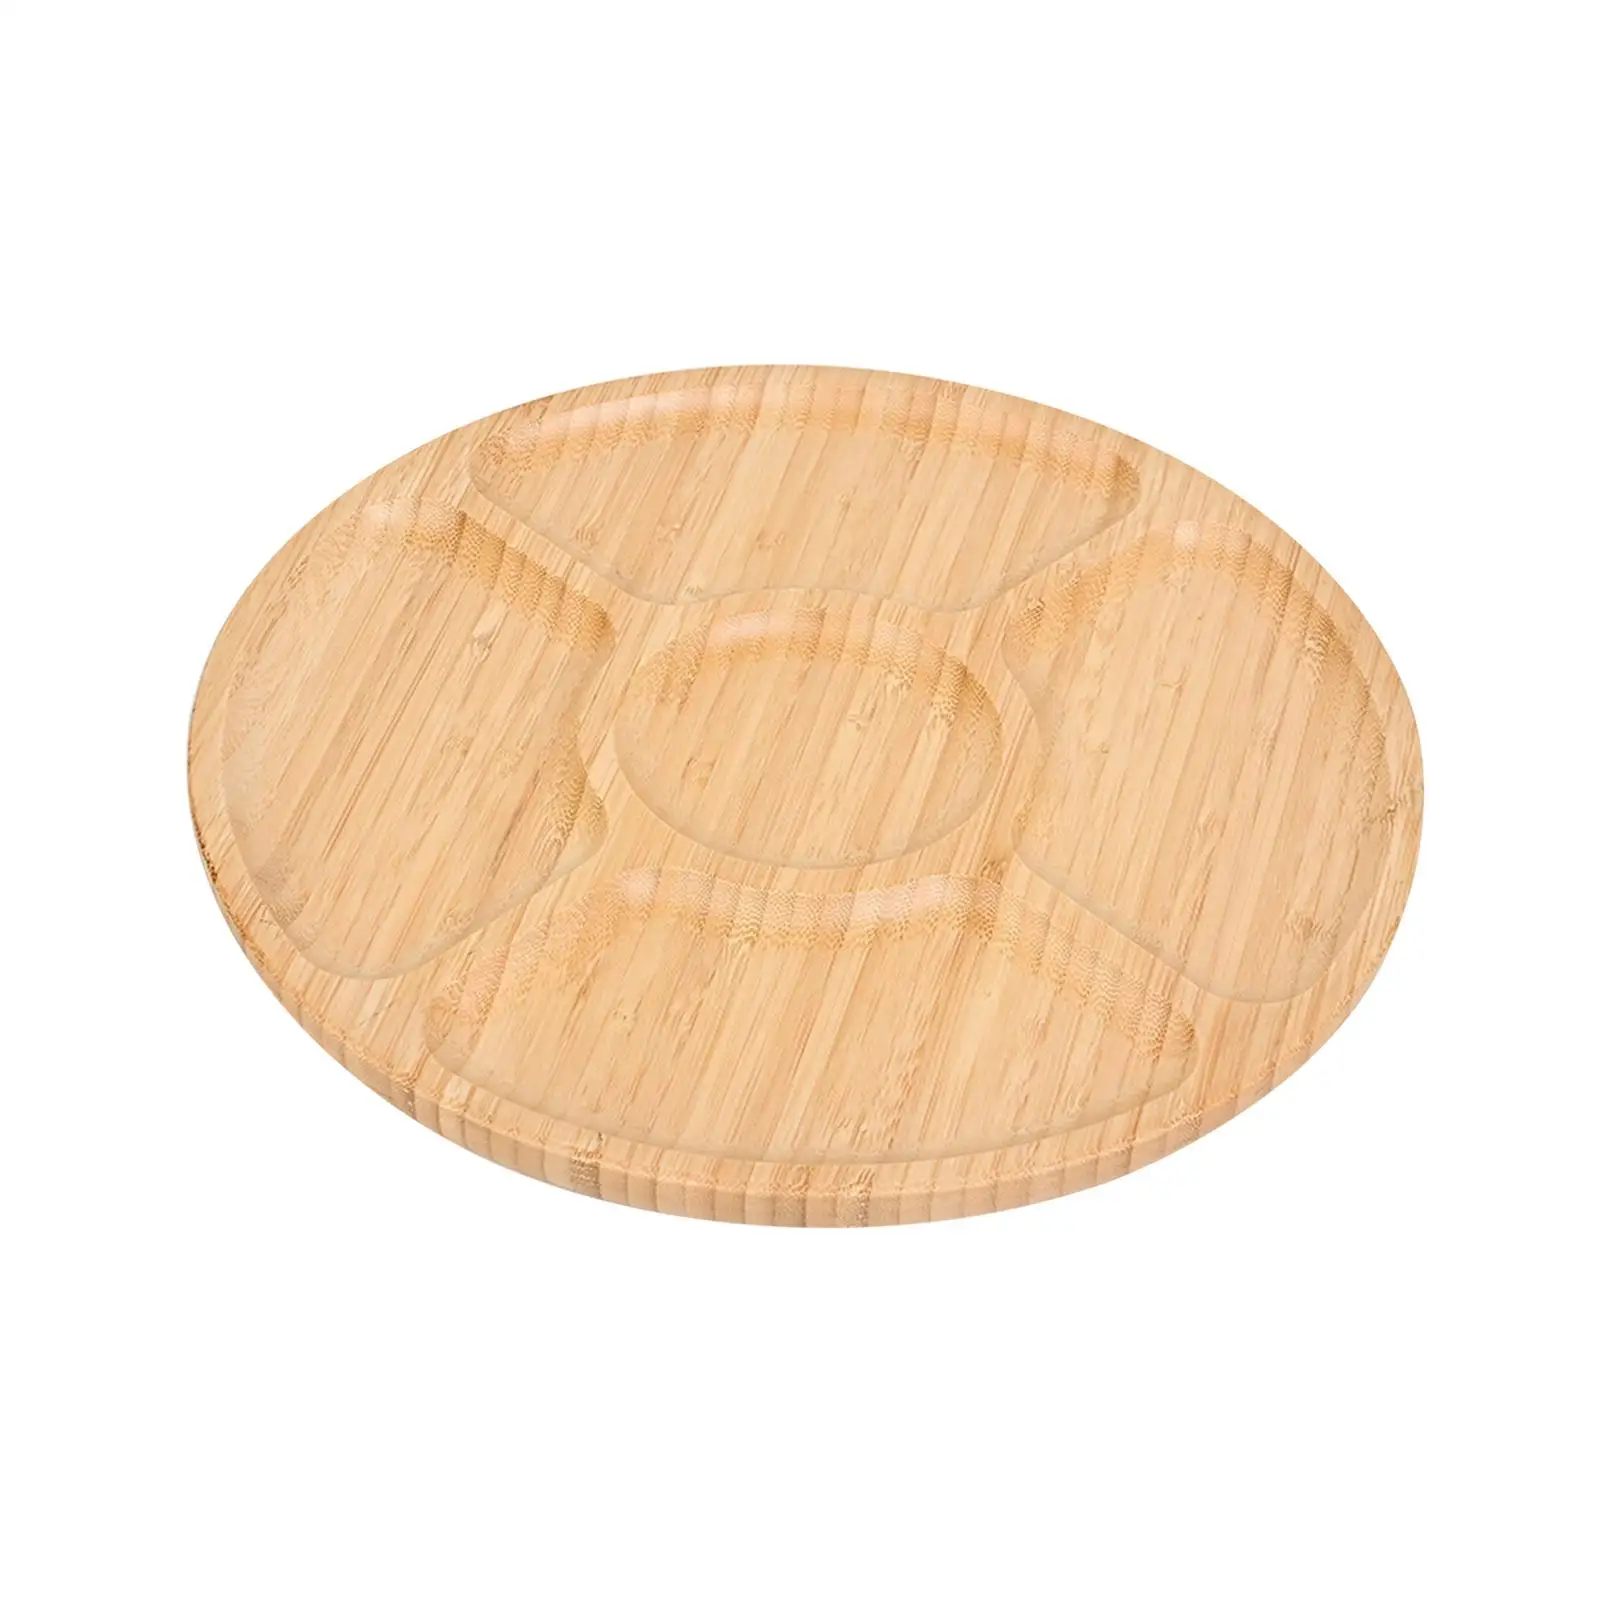 Wooden Tray Wooden Tea Trays Decor Wood Serving Platter Dessert Trays Fruit Plate for Vegetable Appetizer Candies Pastry Bread